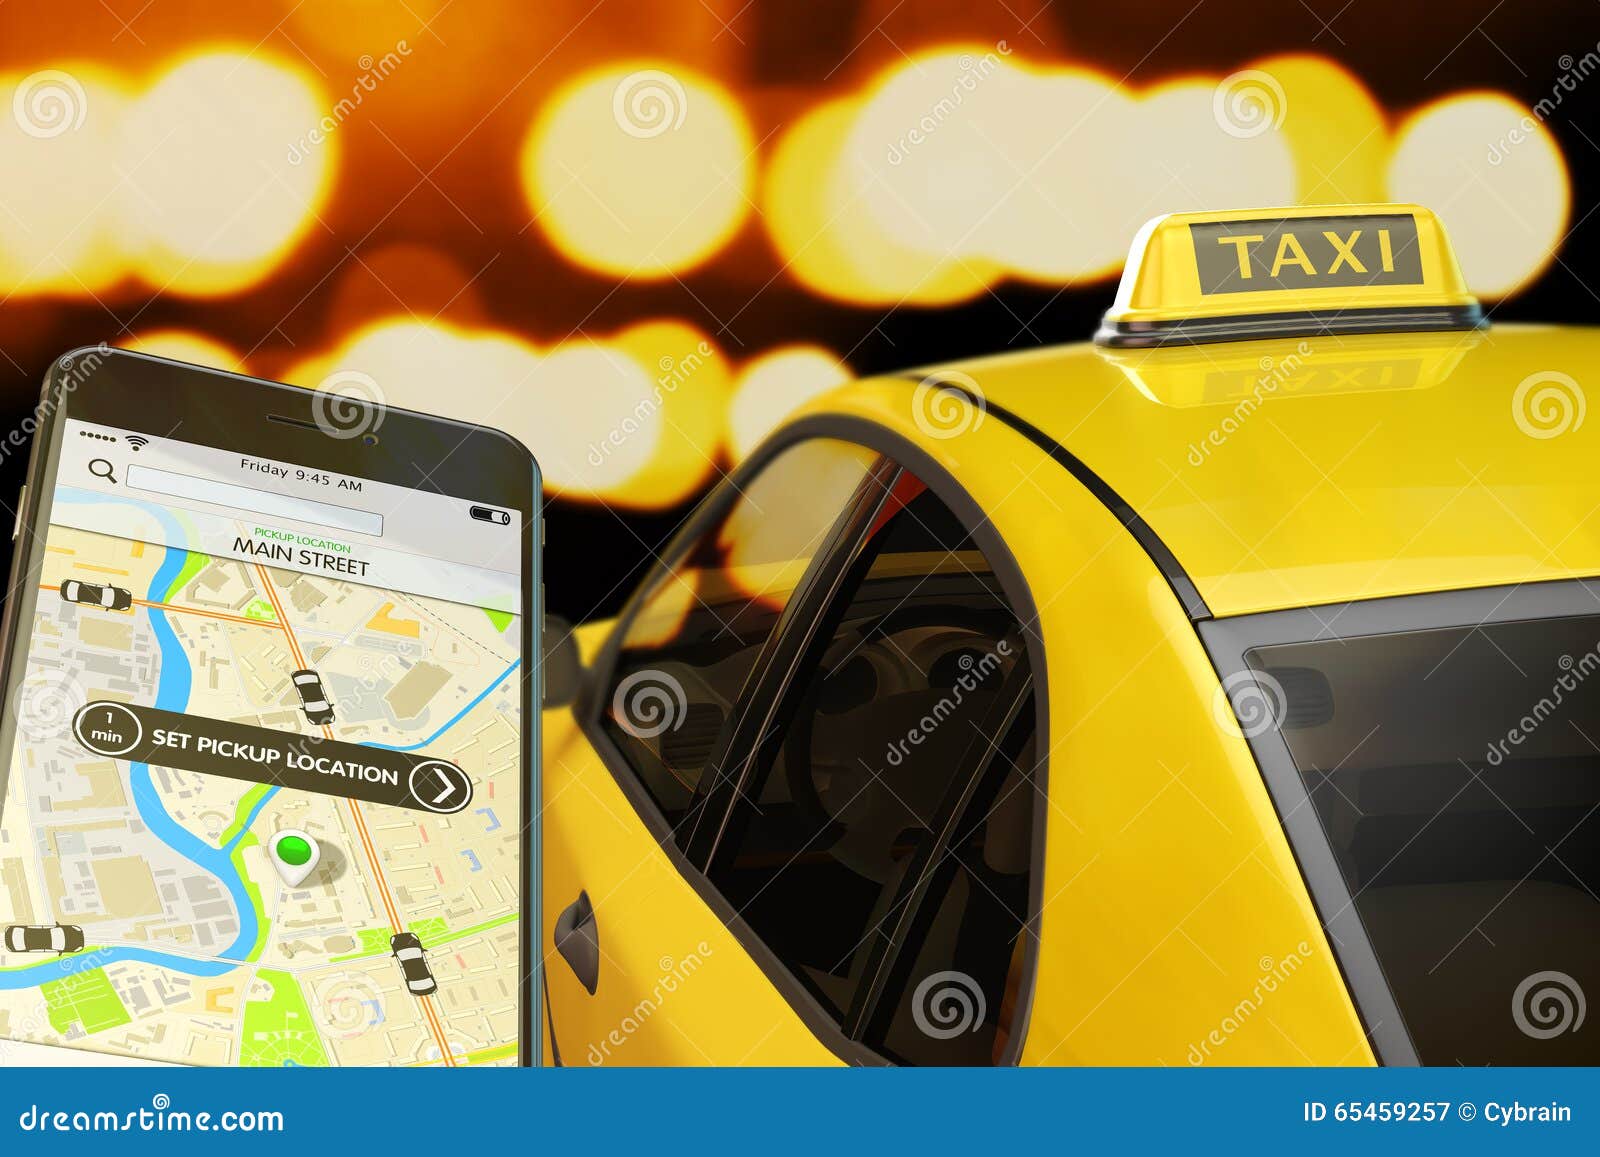 calling taxi from mobile phone concept